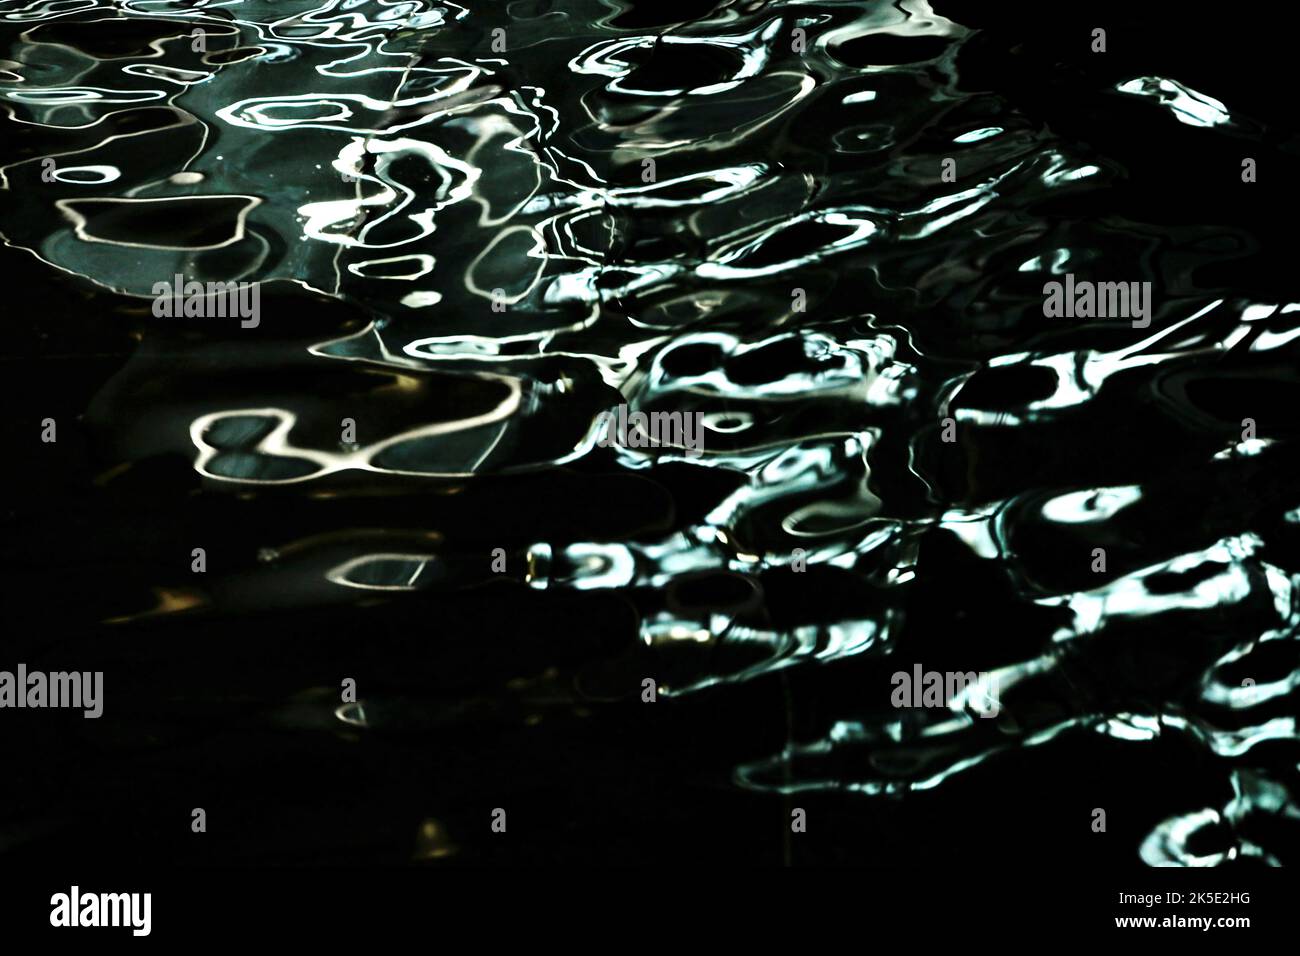 Photo for background material close up on reflection of flickering light on the dark water surface Stock Photo